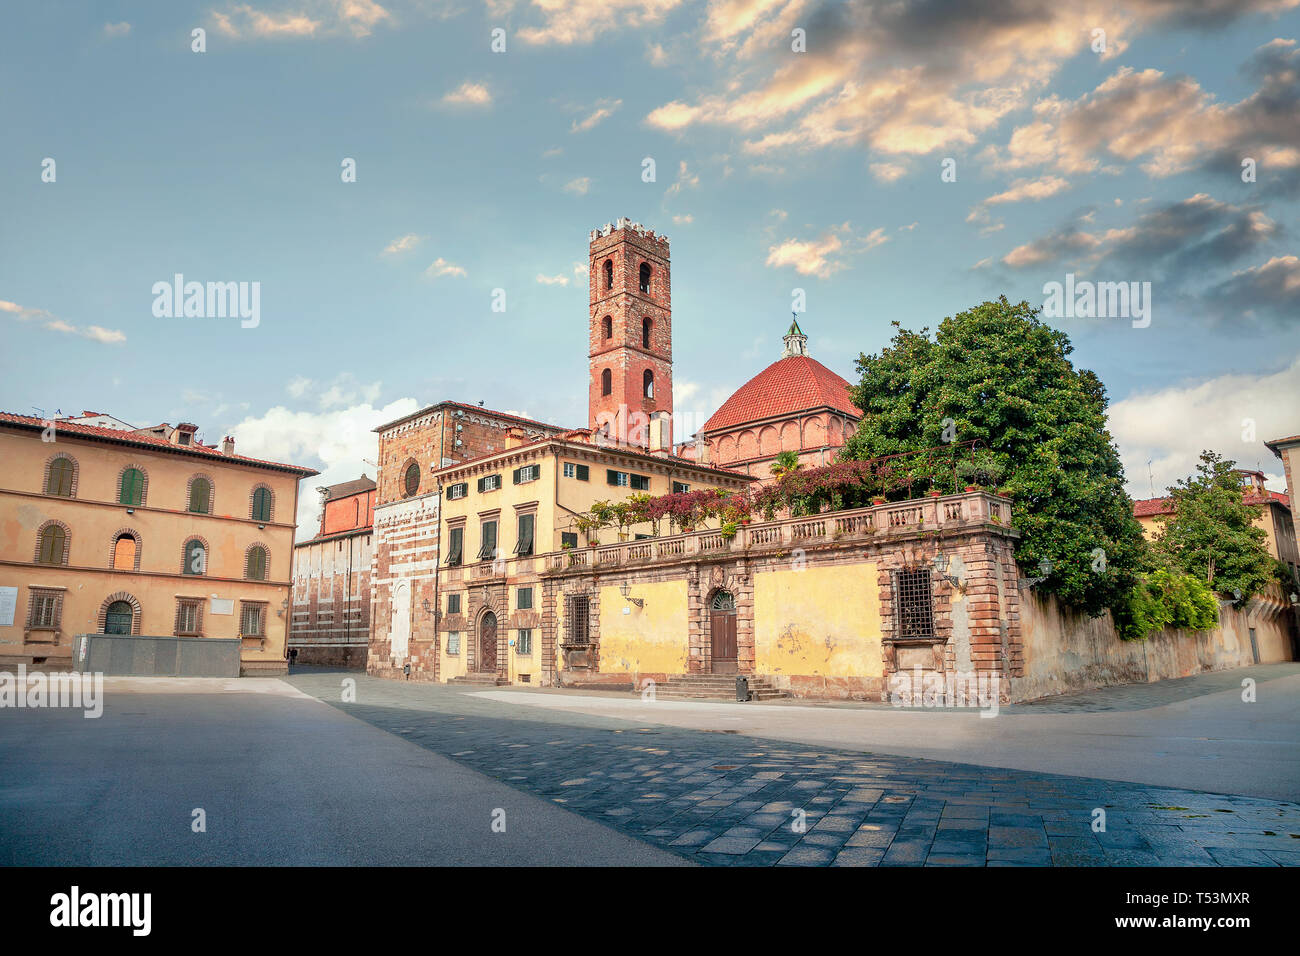 Cityscape with San Martino Square and church of San Giovanni. Lucca, Tuscany, Italy Stock Photo